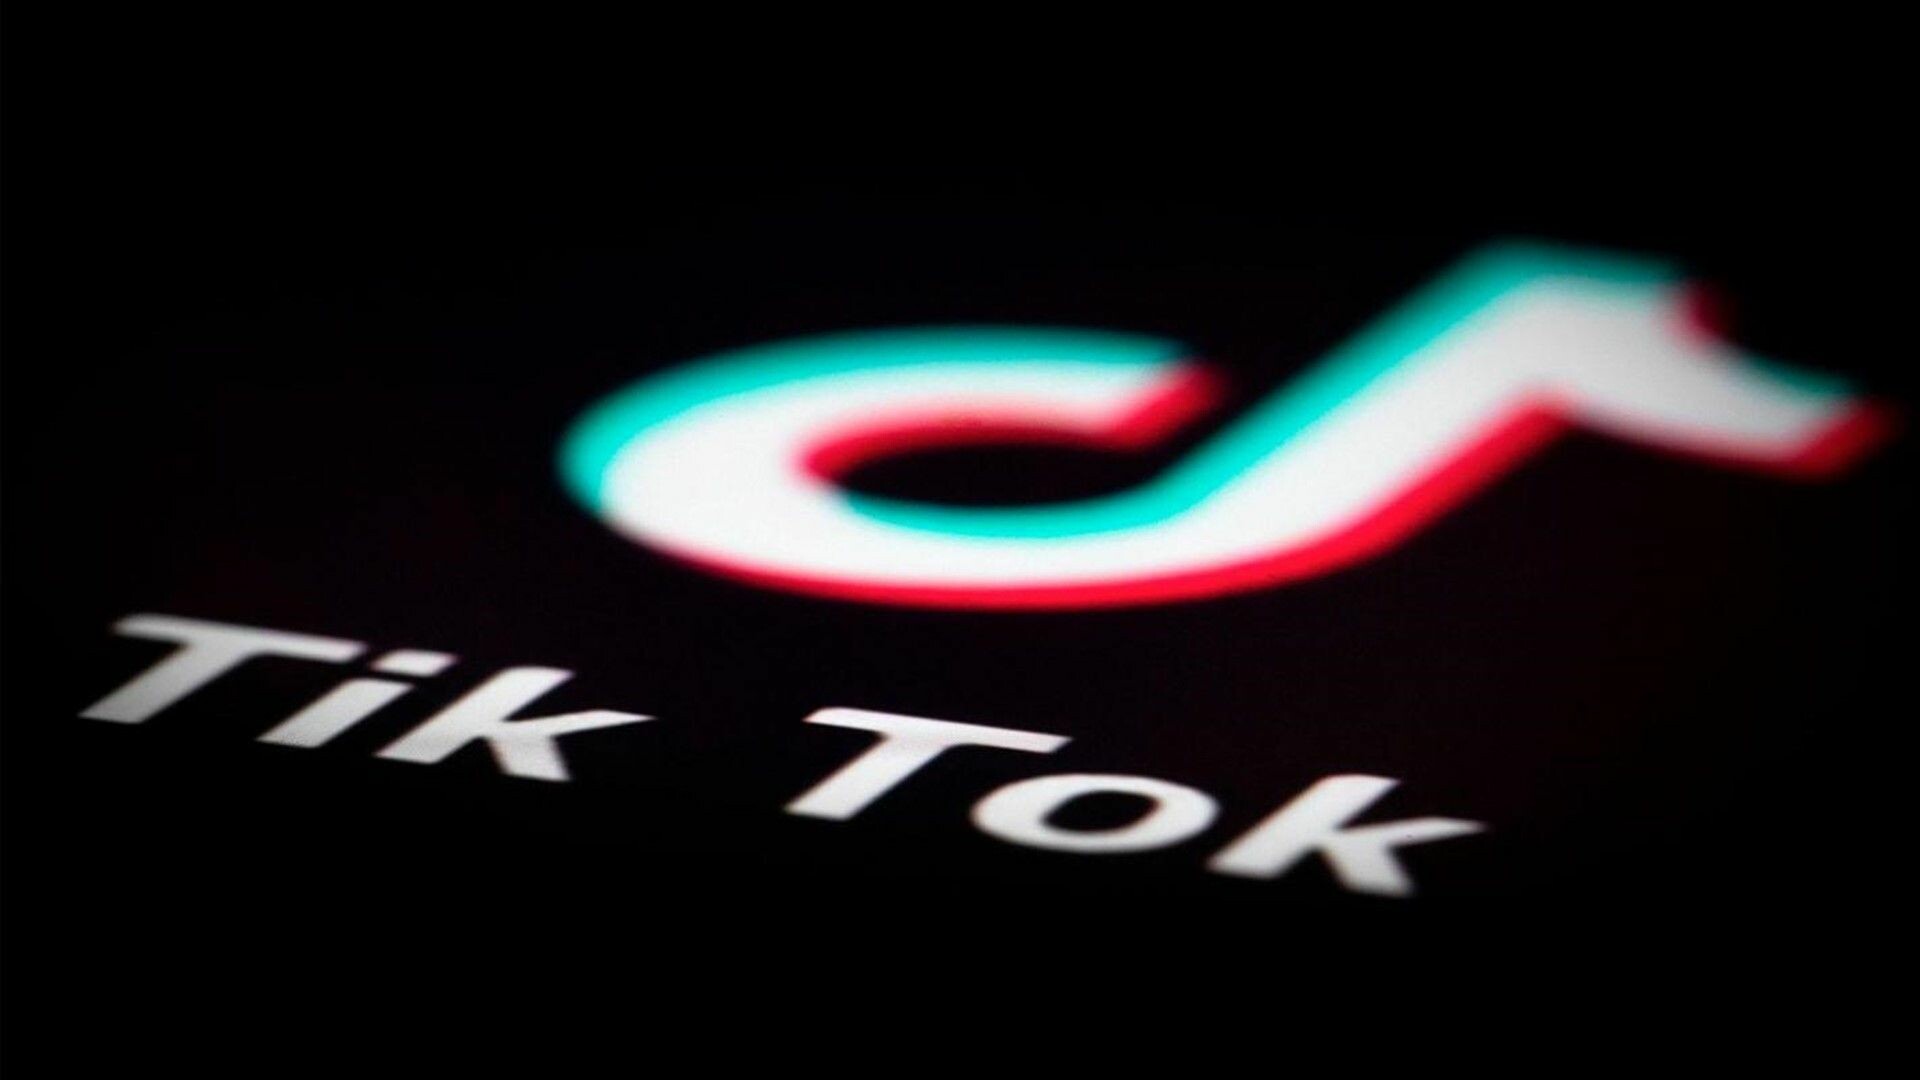 TikTok: Social networking service, Short video clips, adding filters or favorite music. 1920x1080 Full HD Background.